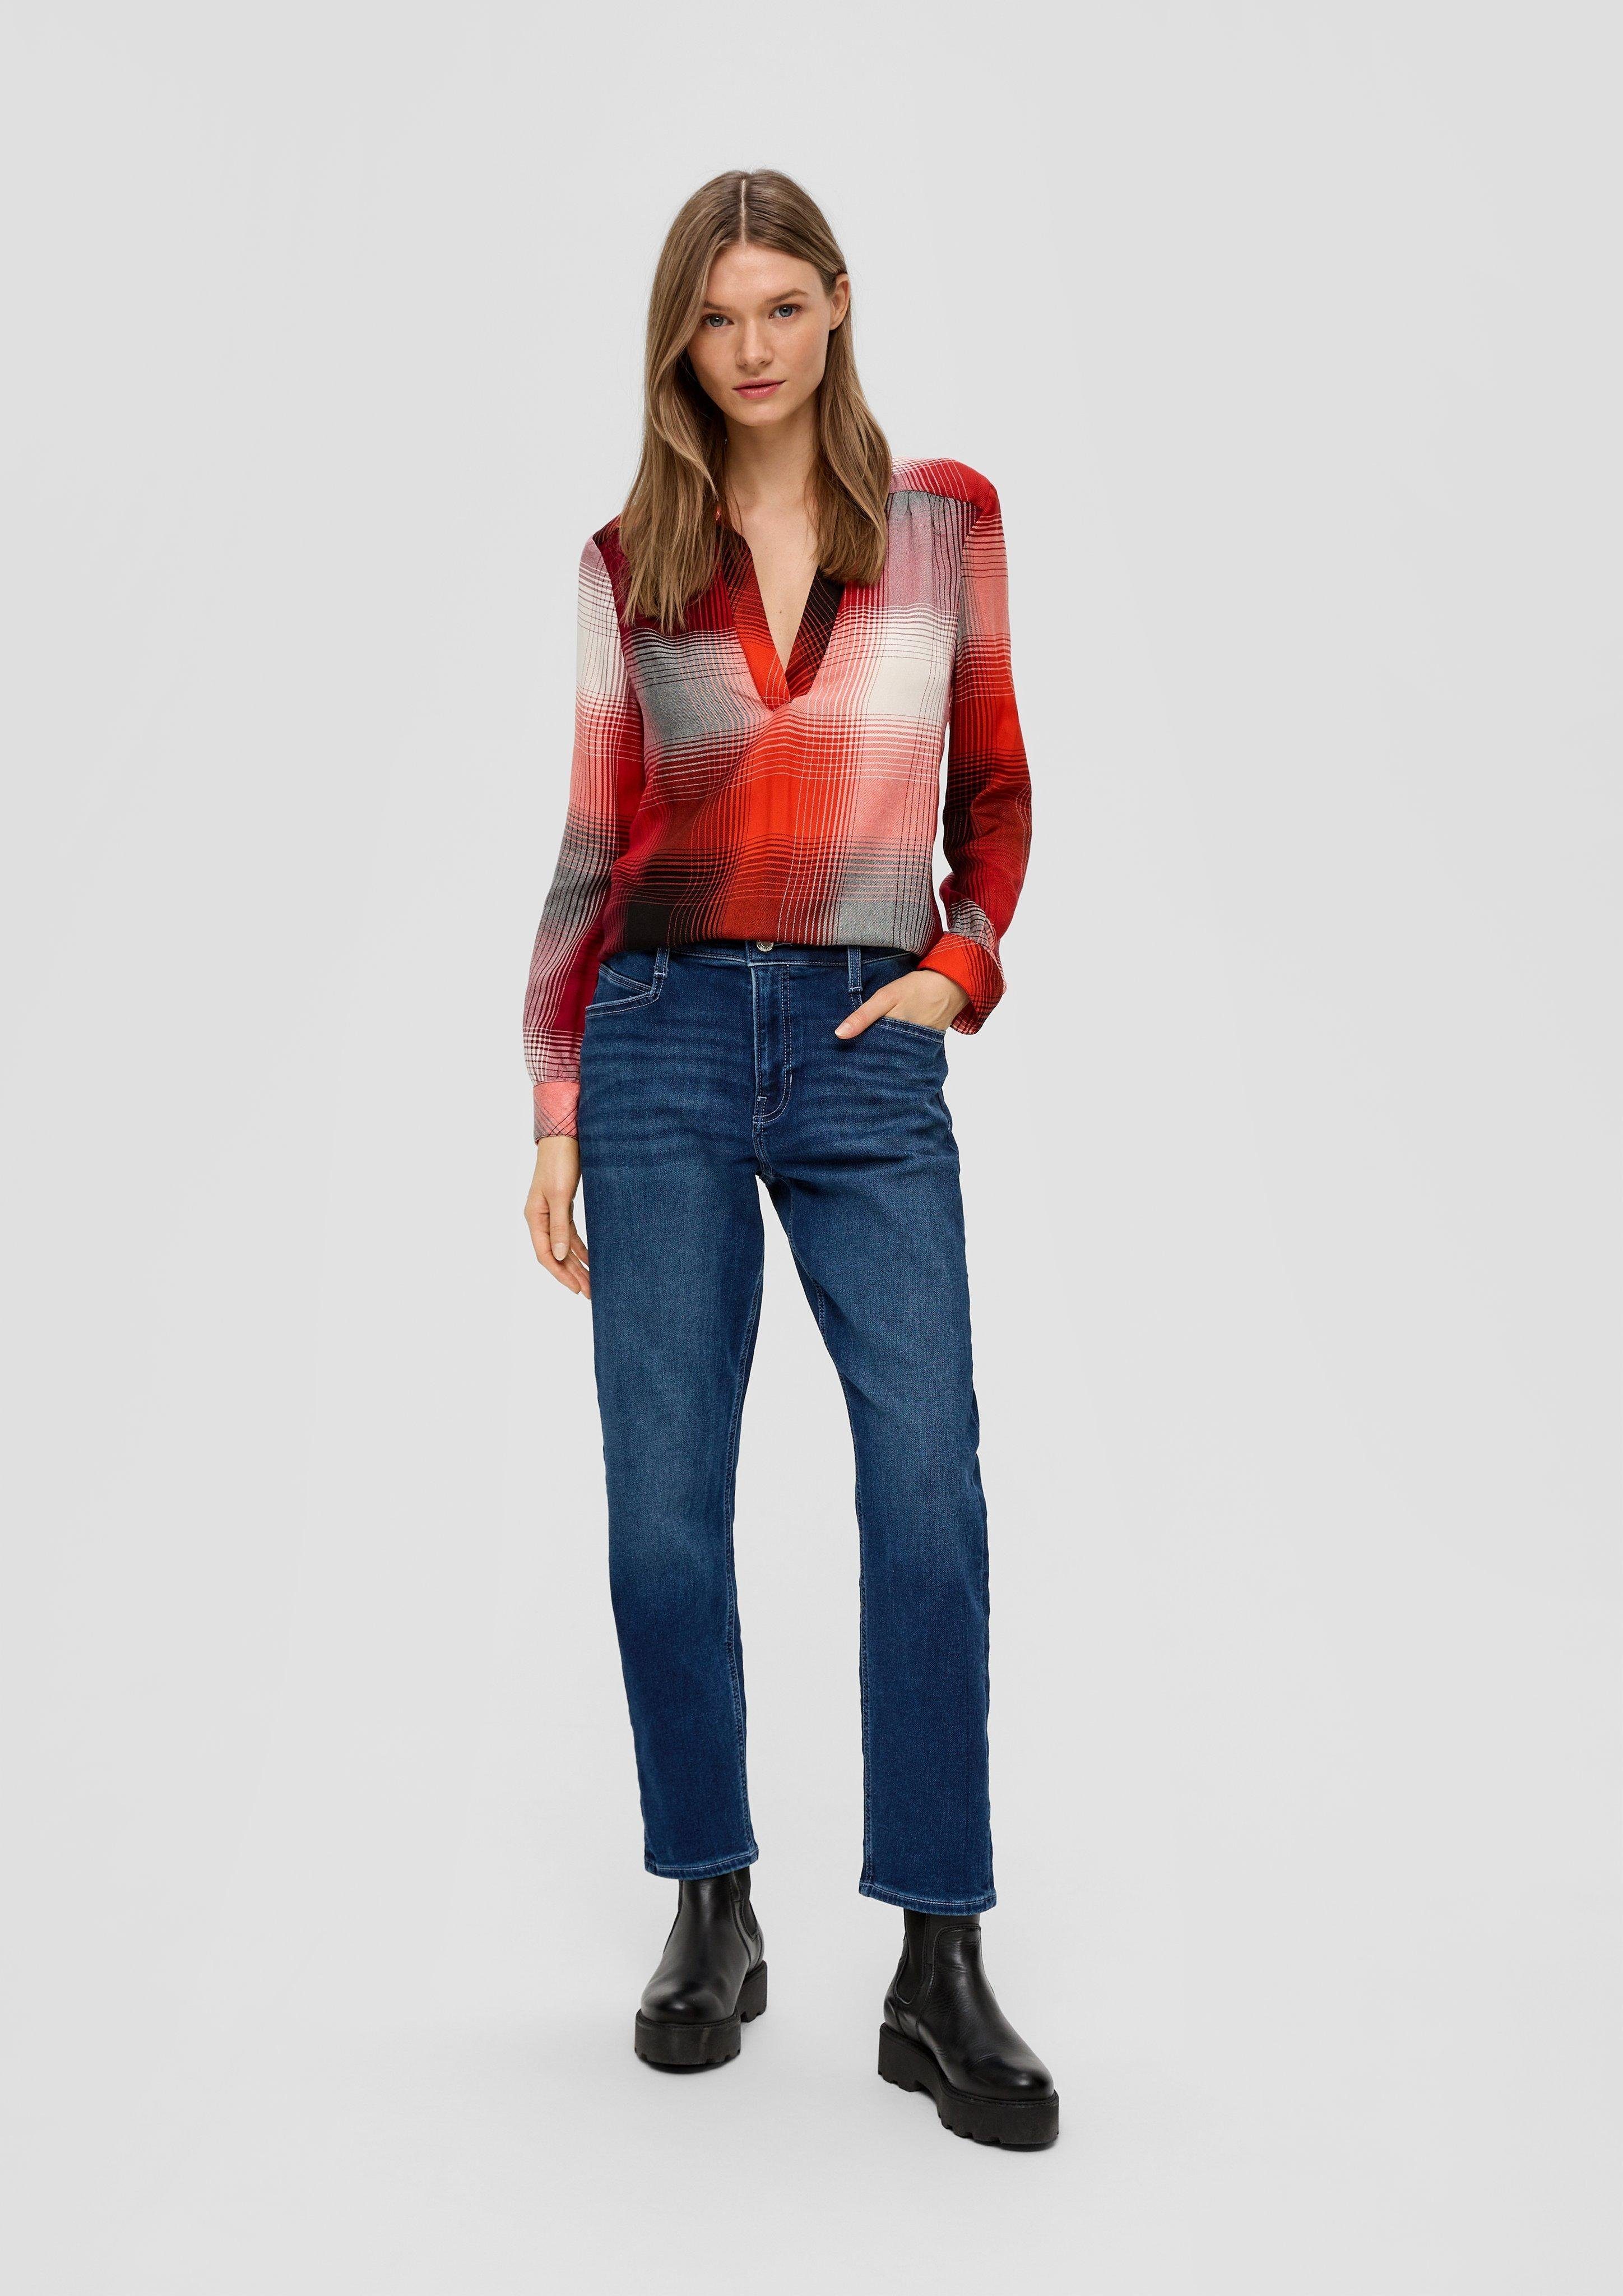 Fit Ankle Tapered Mid Boyfriend / / Leg Label-Patch, Ziernaht Slim Relaxed Rise s.Oliver Jeans / 7/8-Jeans